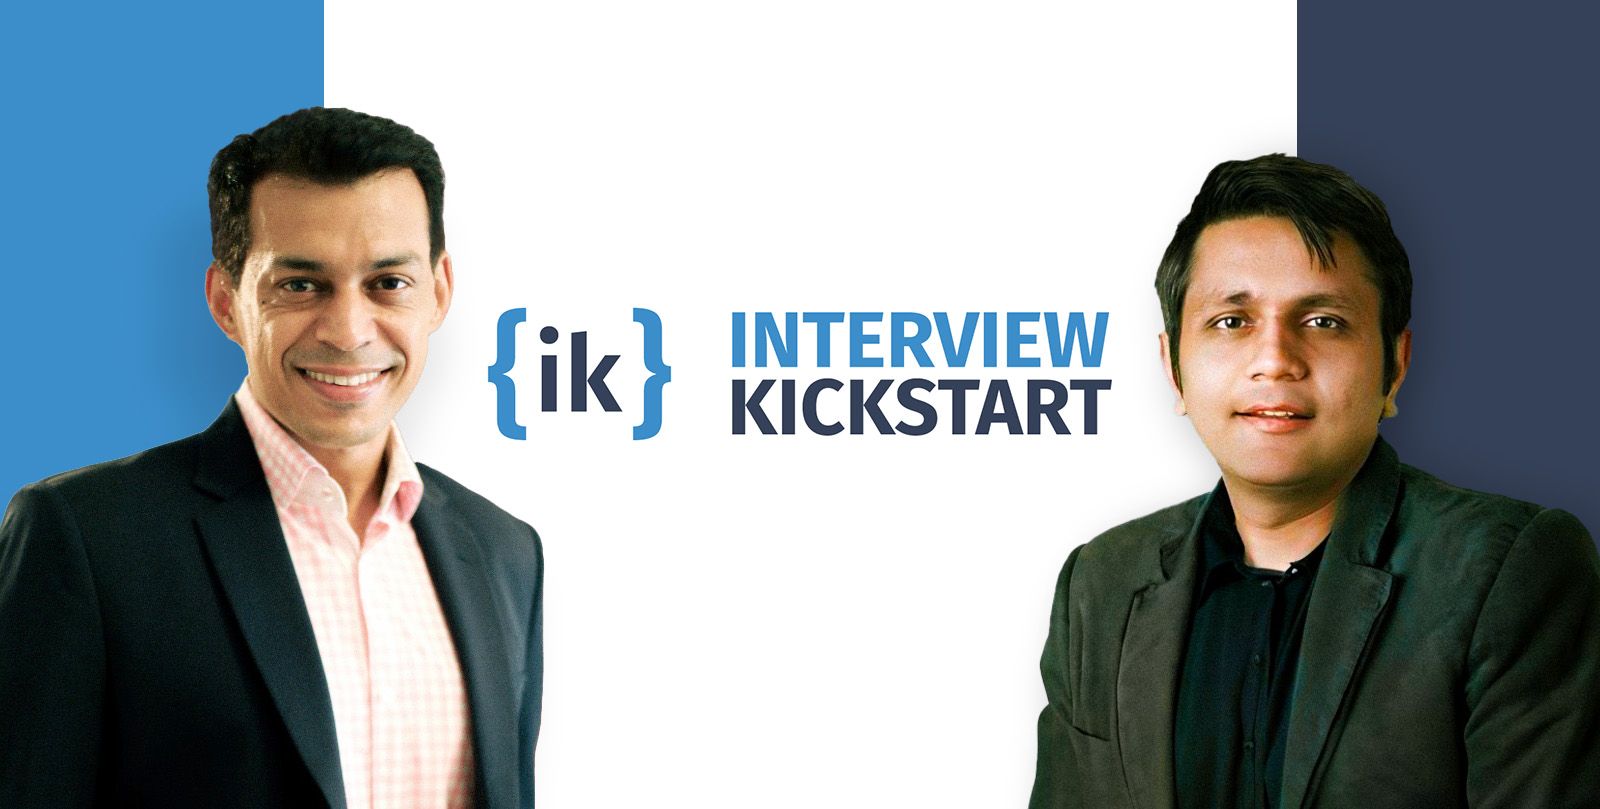 Interview Kickstart Raises $10m, Facilitating AI Learning And Employment Opportunities For Engineers 